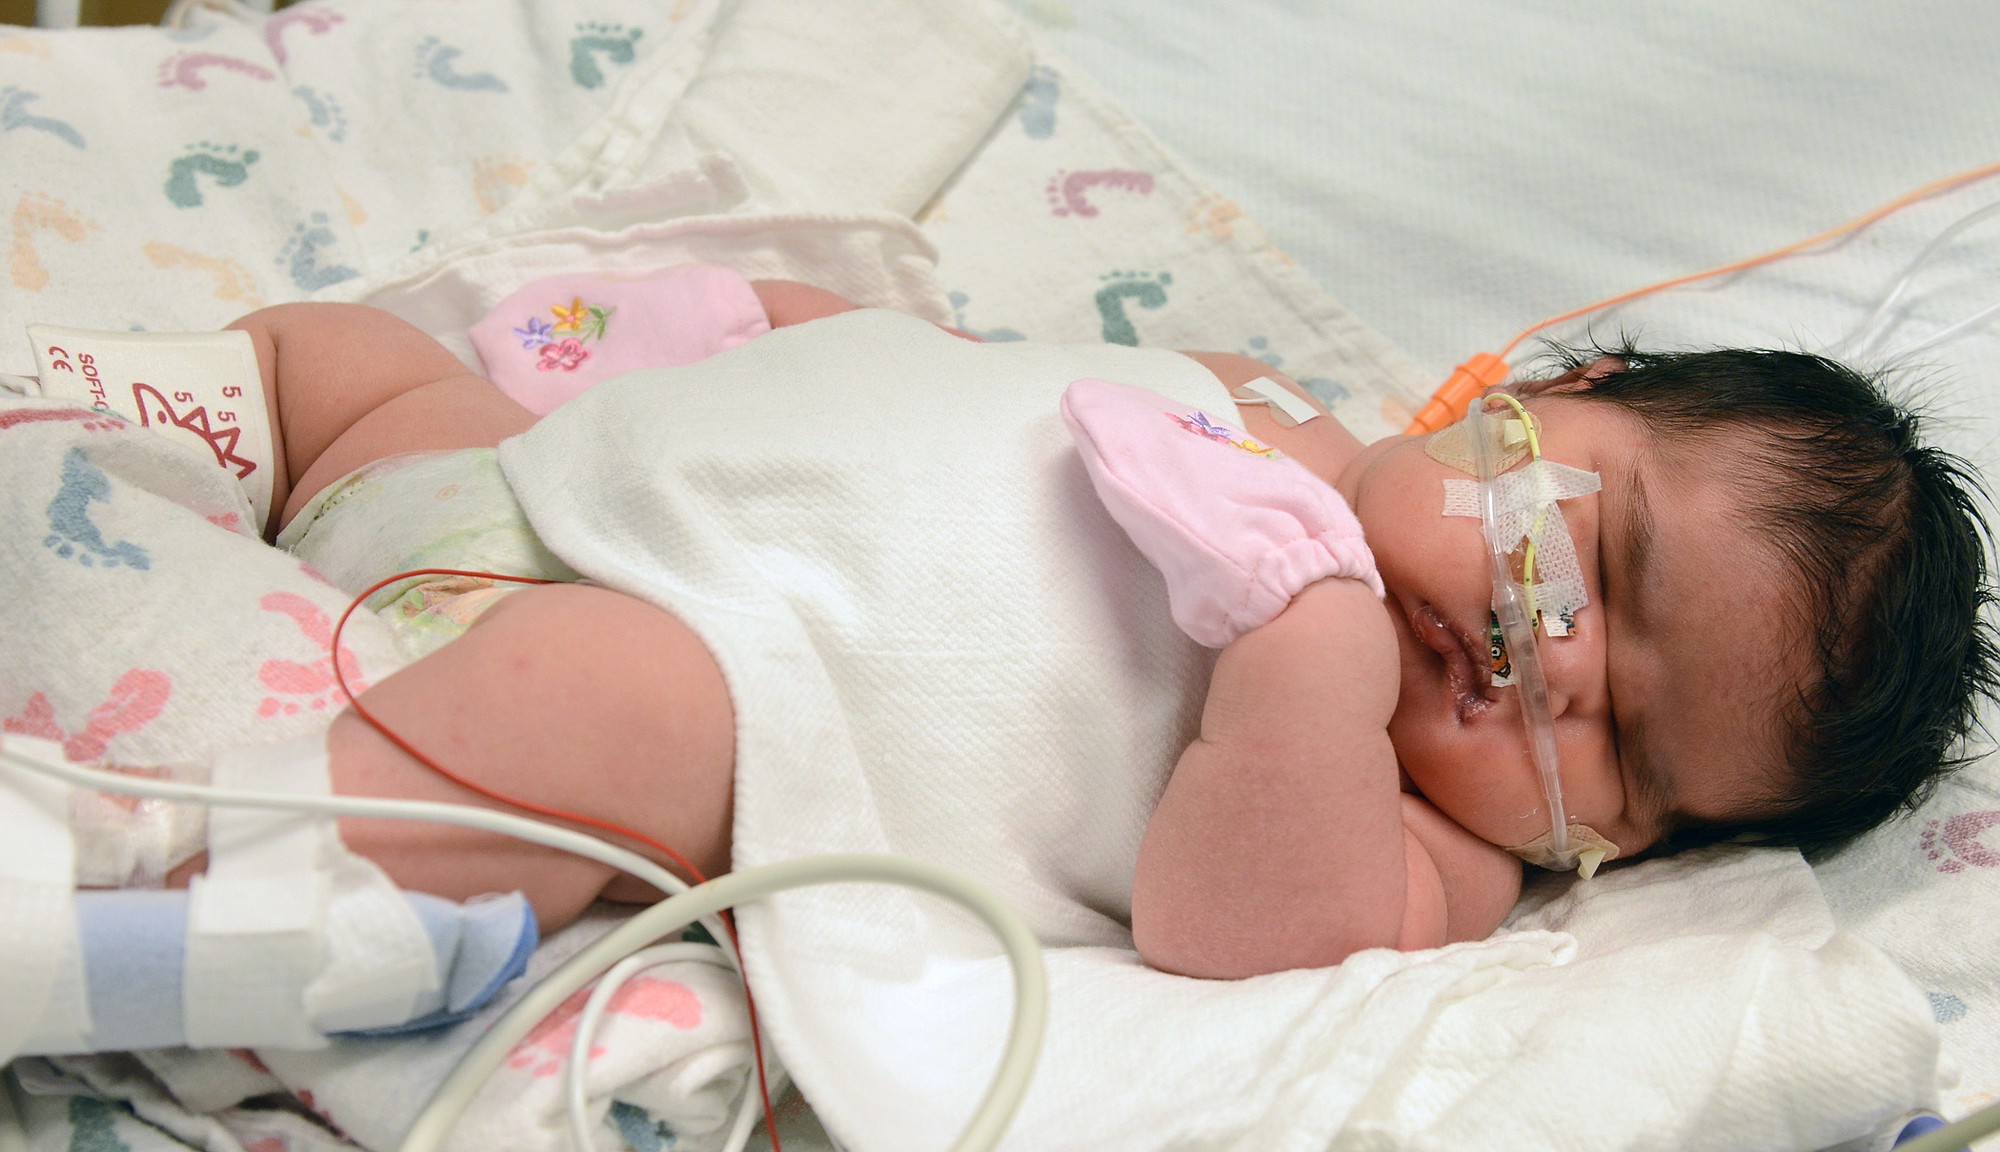 Mia Yasmin Garcia was born by cesarean section in Alamosa, Colo., on Monday, weighing 13 pounds, 13 ounces.